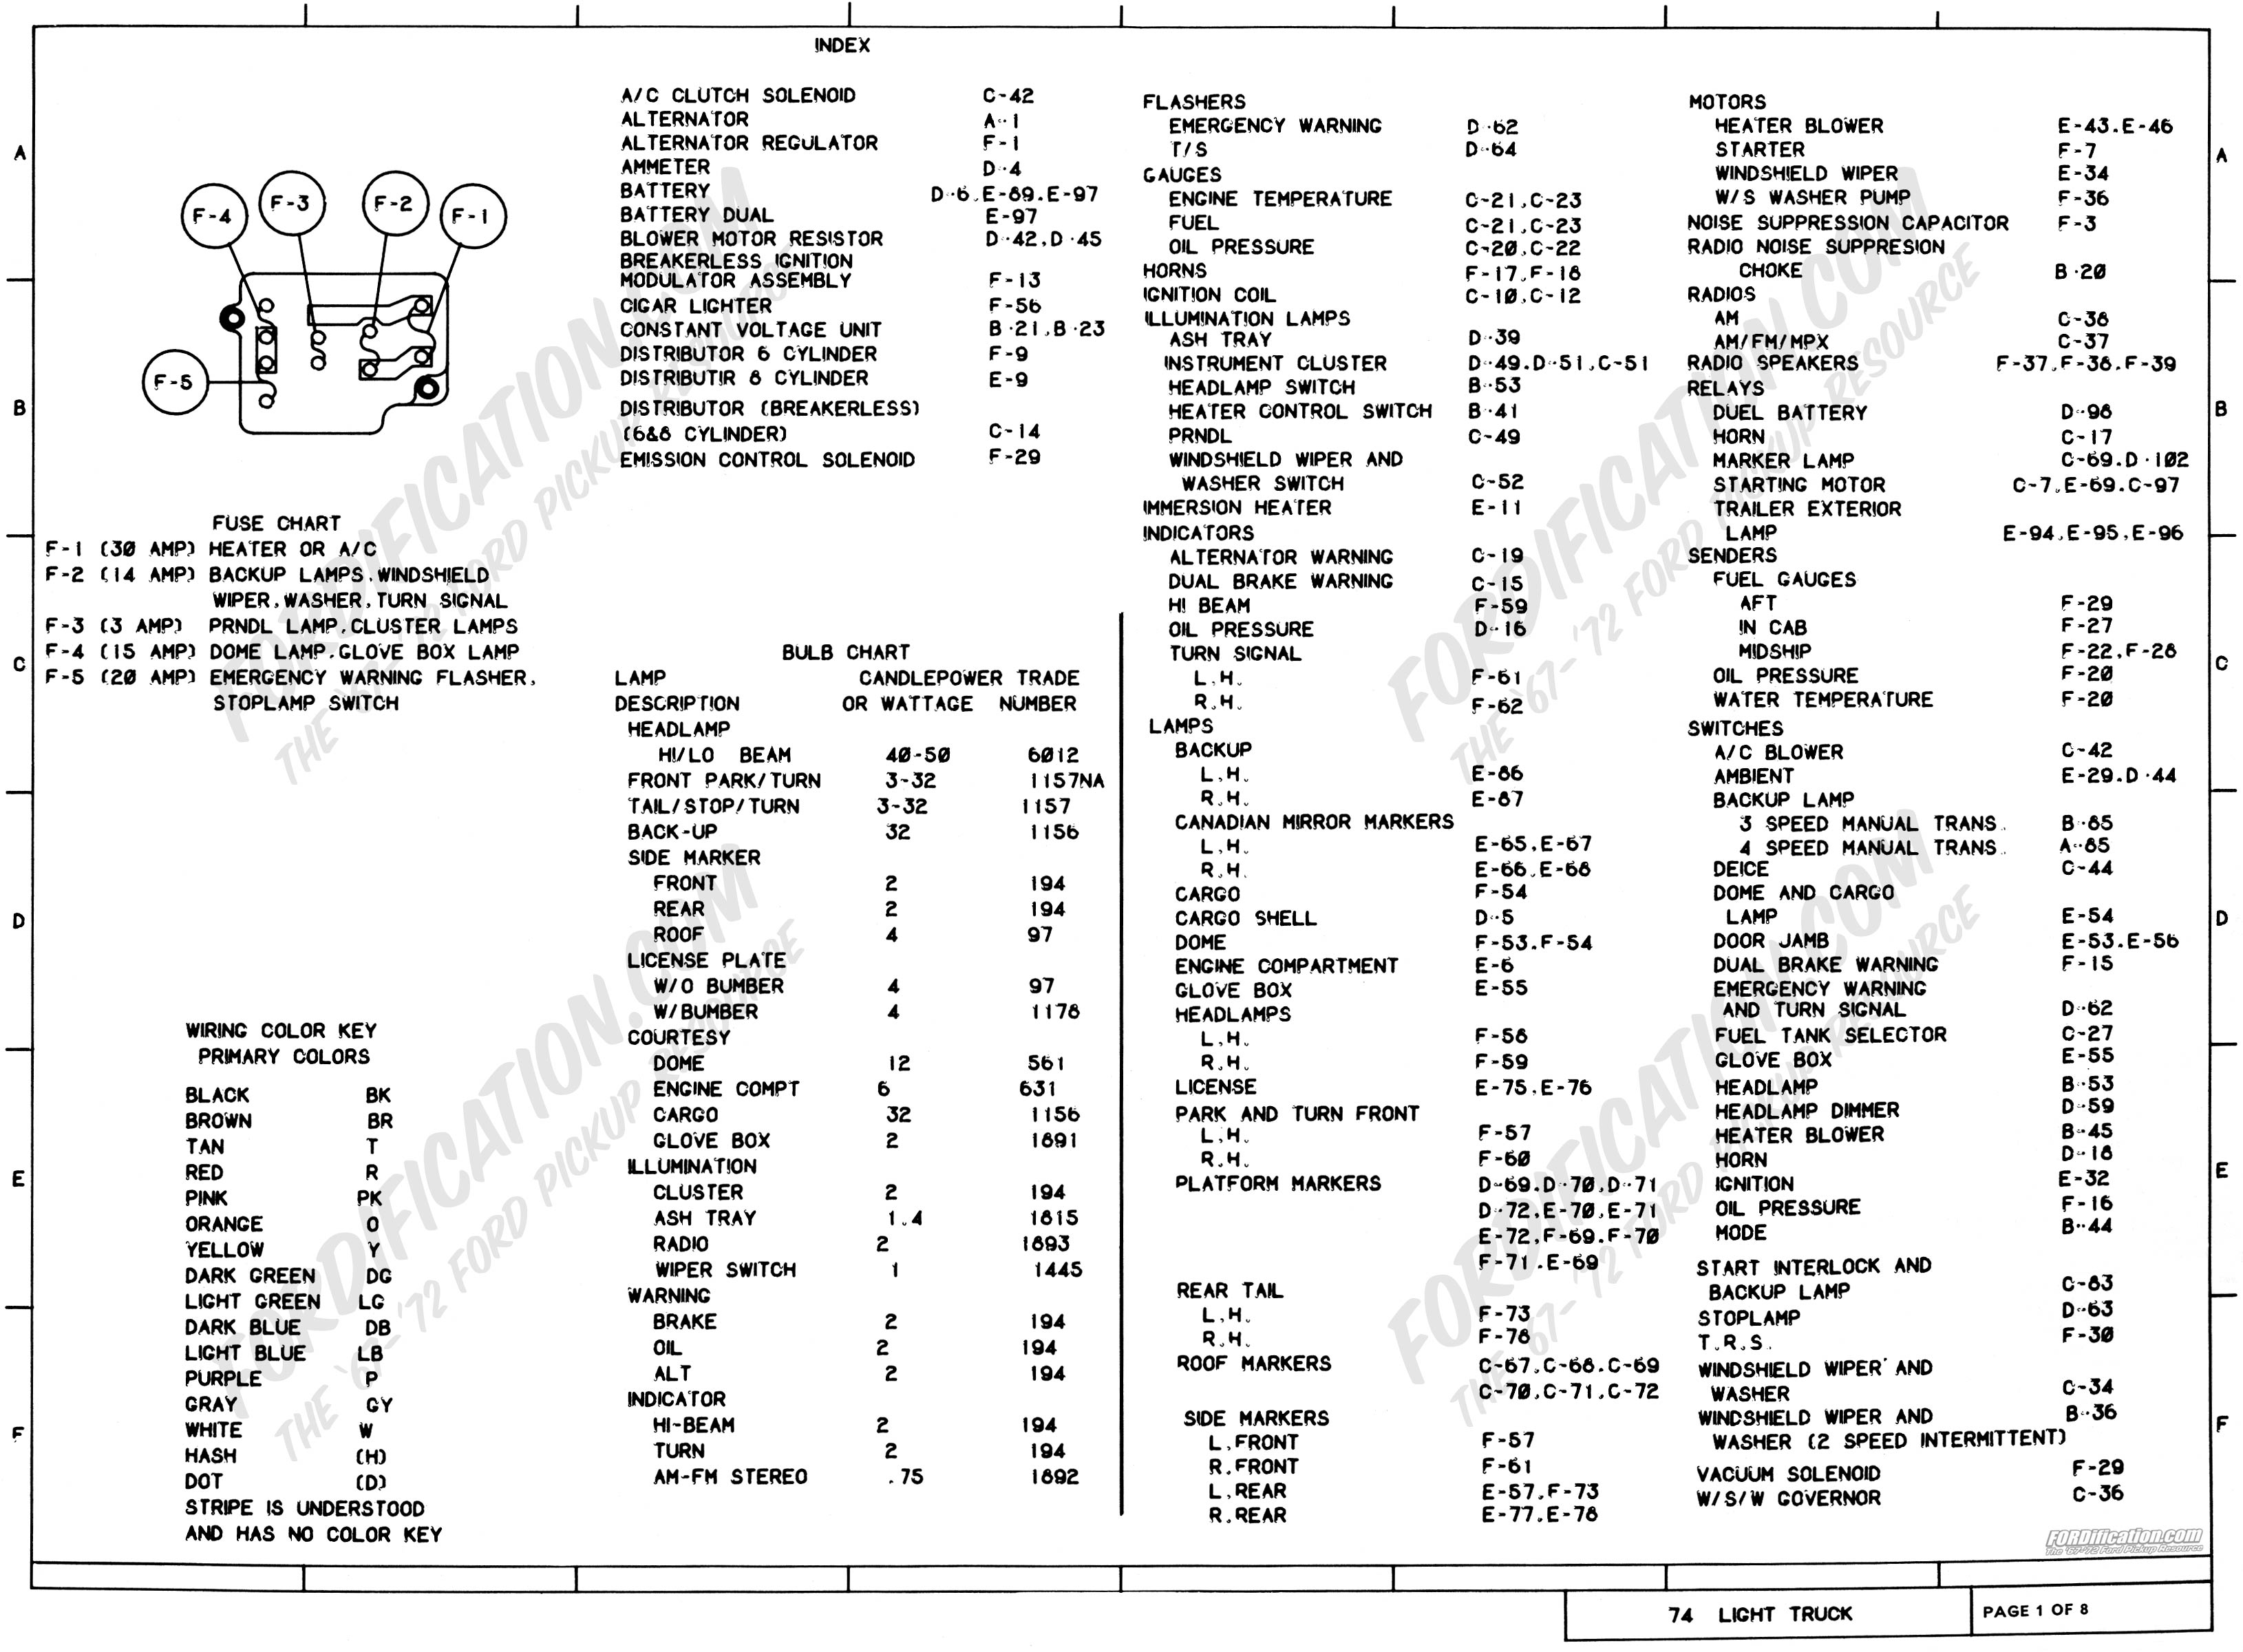 1978 Ford F150 Starter Solenoid Wiring Diagram from www.fordification.net